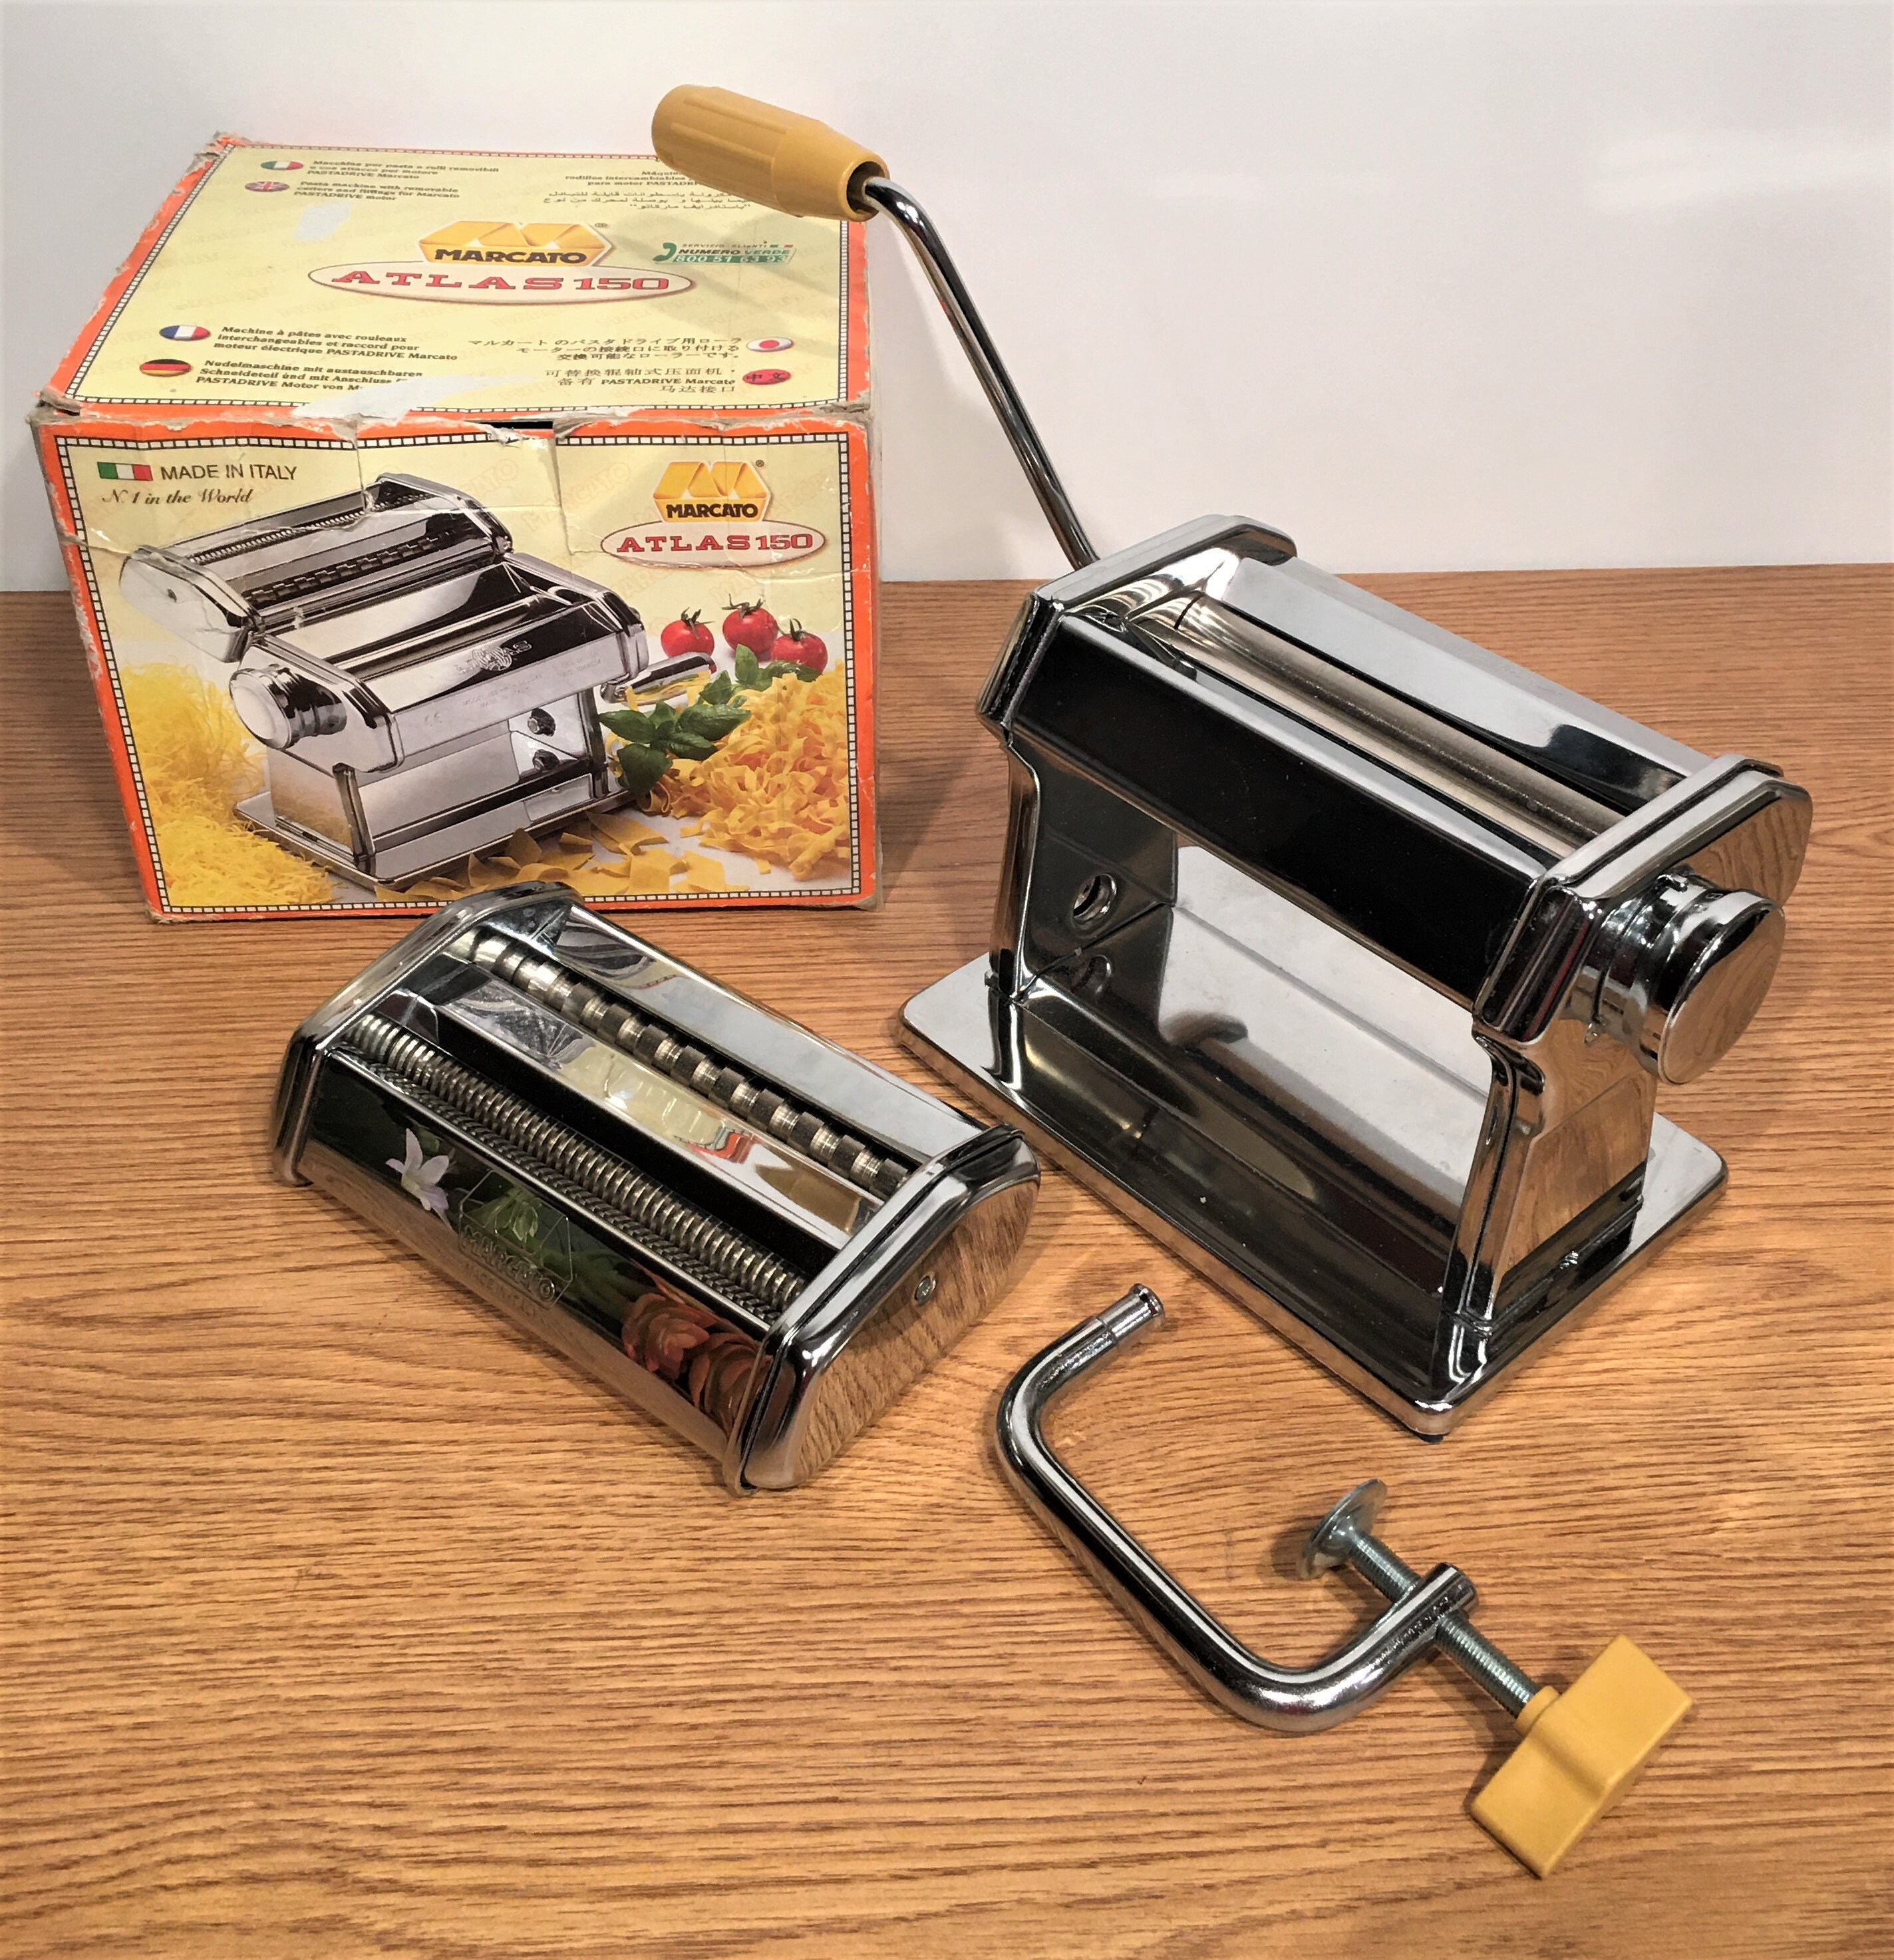 MARCATO Atlas 150 Pasta Machine, Made in Italy, Includes Cutter , Hand Crank